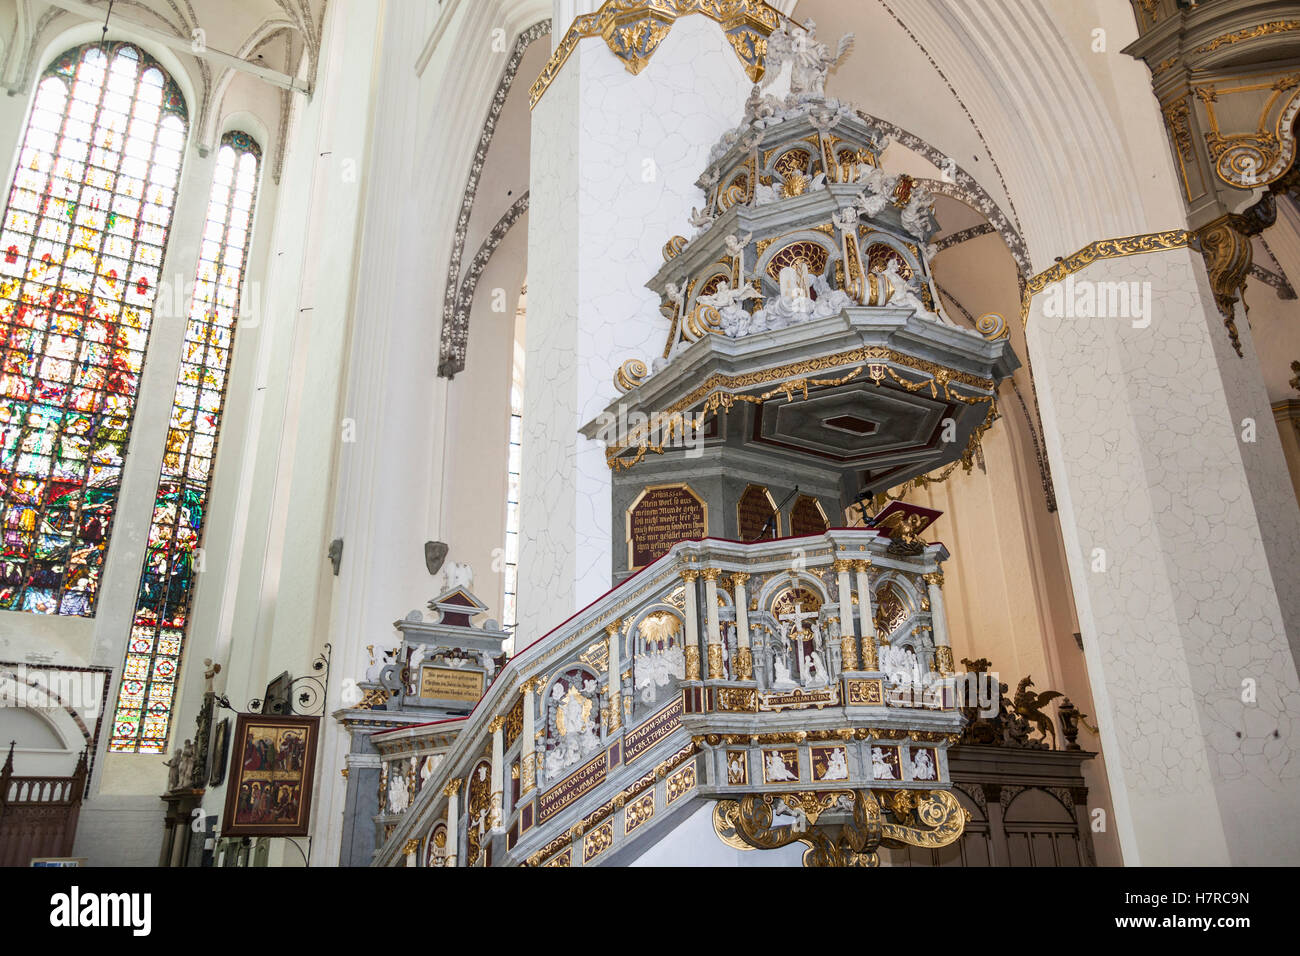 The pulpit, St Mary’s Church, Marienkirche, Rostock, Mecklenburg-Vorpommern, Germany Stock Photo